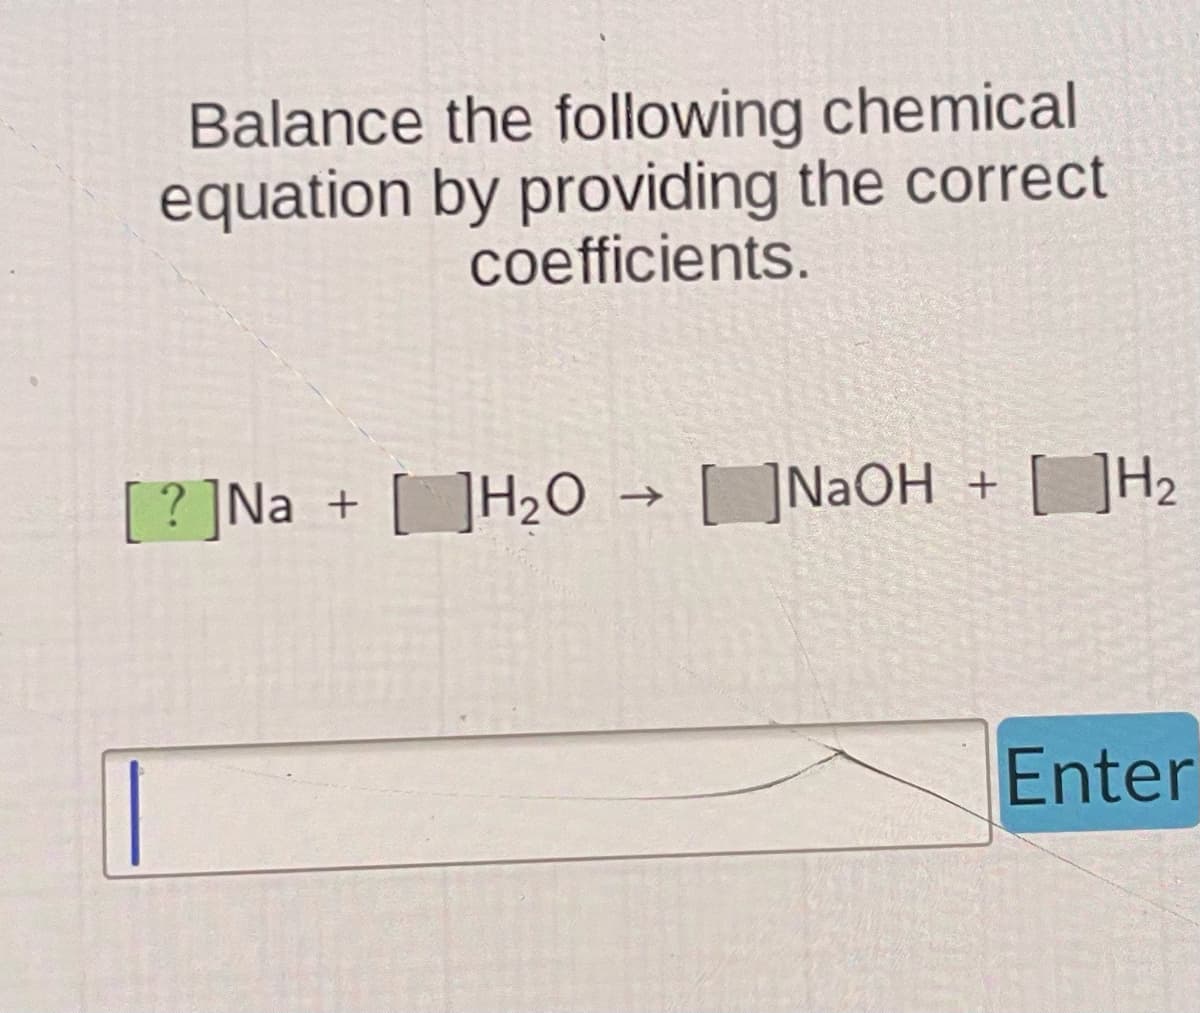 ||
Balance the following chemical
equation by providing the correct
coefficients.
? Na + H₂O
NaOH + H₂
Enter